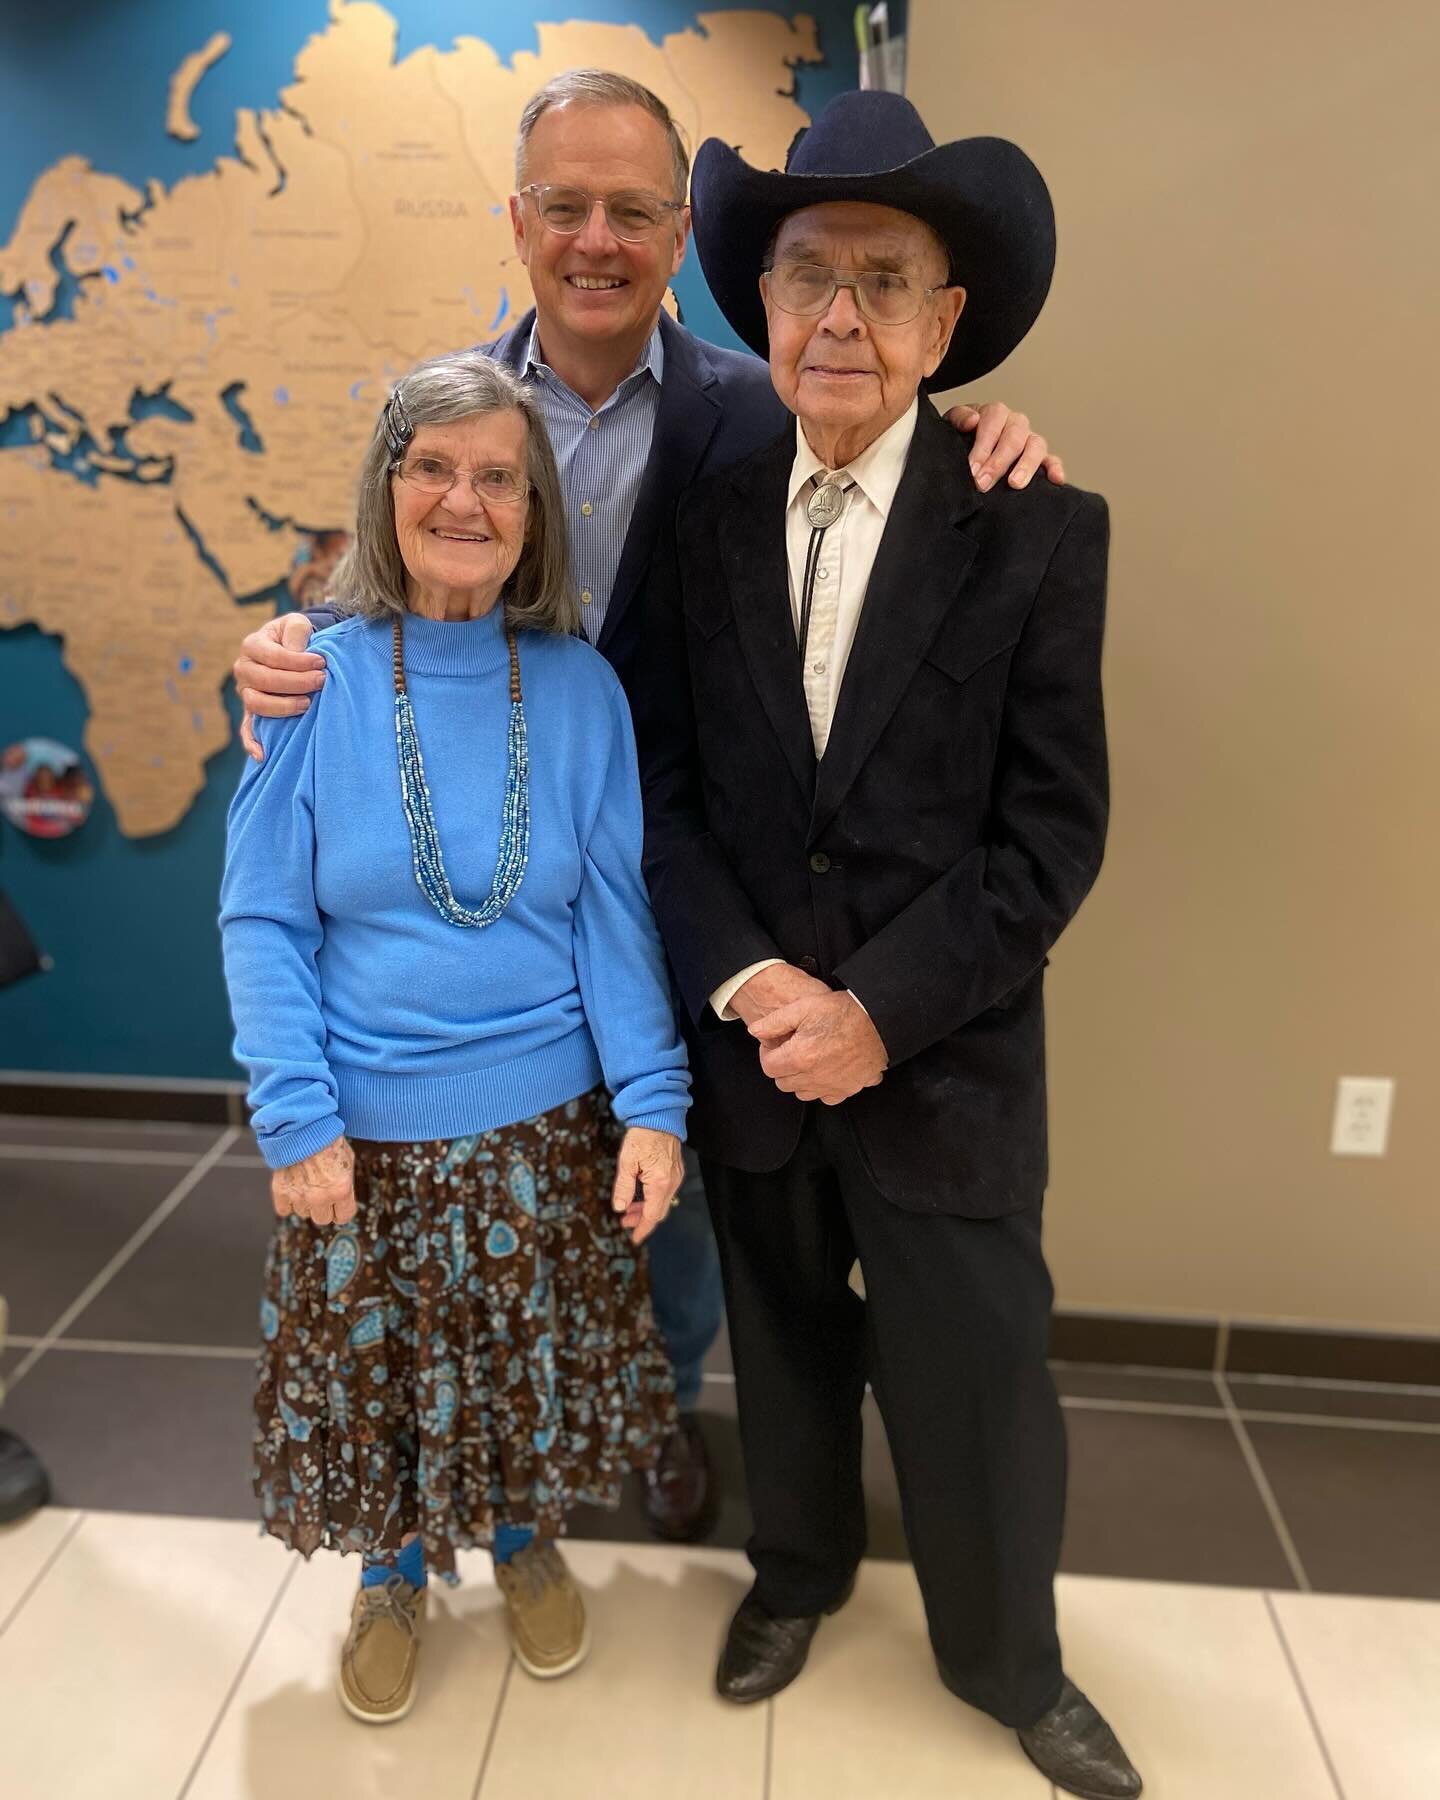 Got to introduce @westsidefamilychurch to the couple that first invited me to church fifty years ago this June - Ray &amp; Mary Graham from Cleveland, Ohio. I am forever grateful.